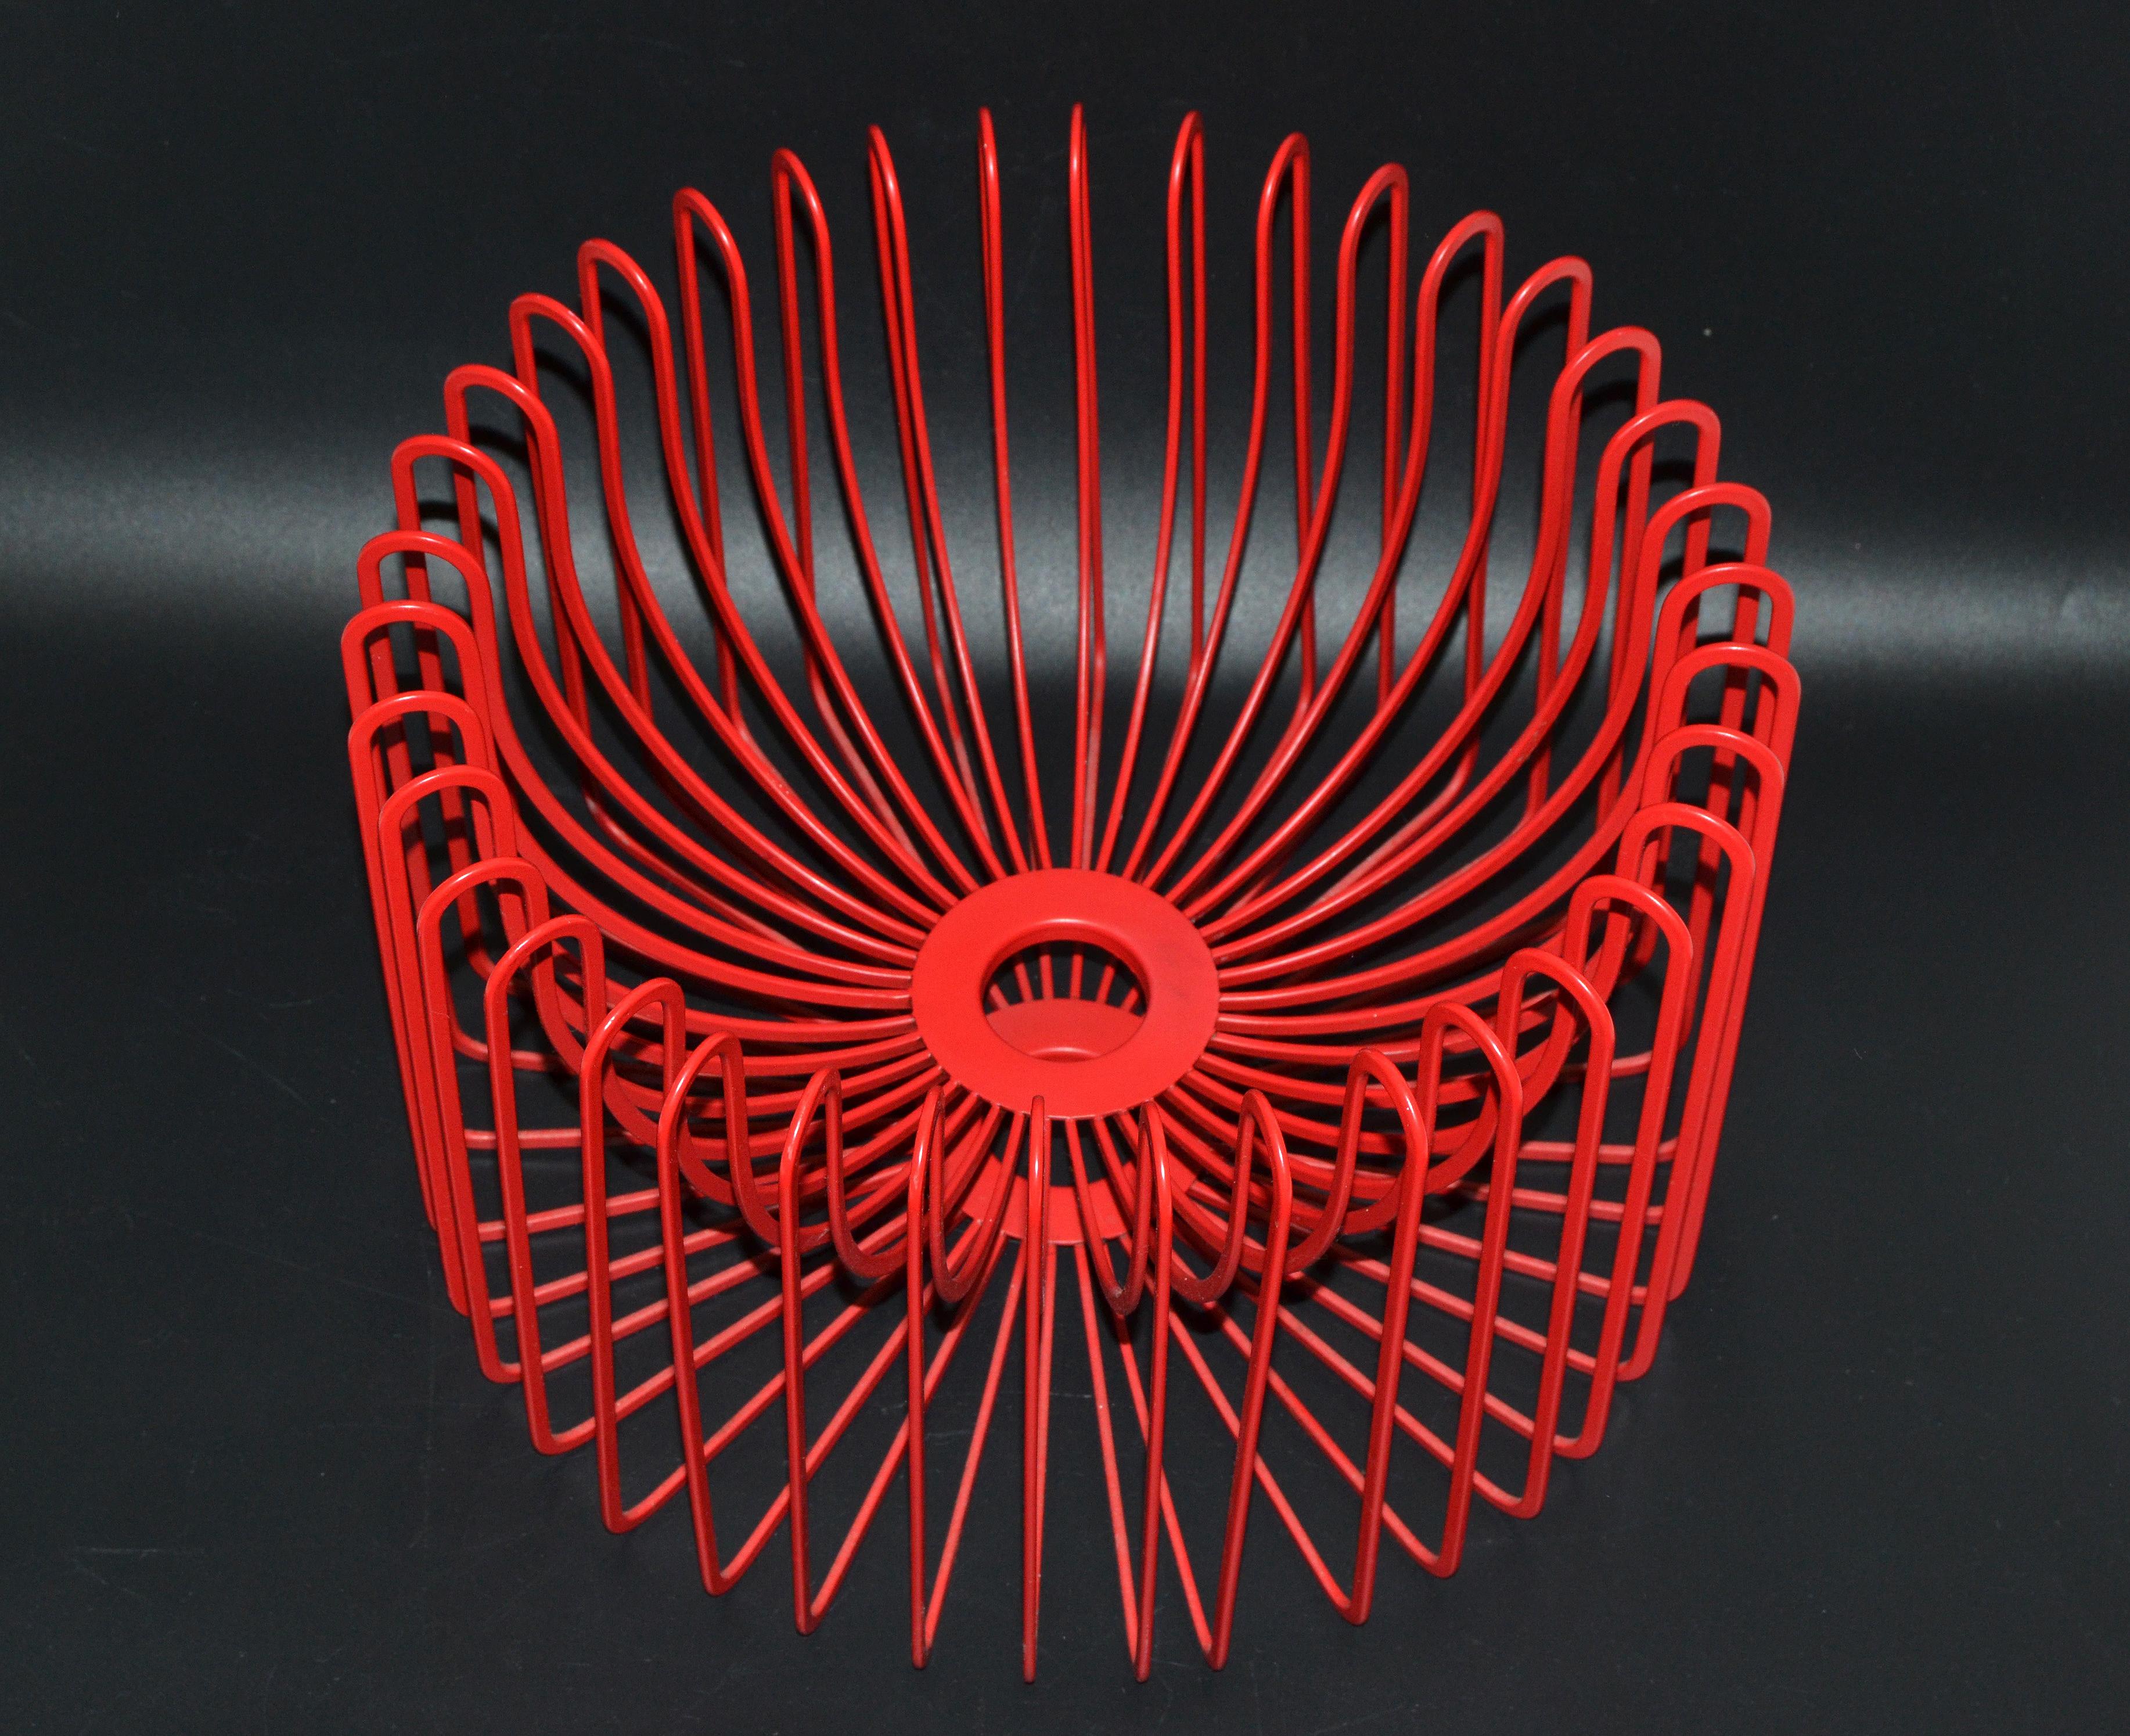 Scandinavian modern sculptural red metal bowl, made in Sweden in the 1980s.
This bowl is made out of one piece of metal stunning craftsmanship.
The sculptural bowl serves as an artistic and modern centerpiece for any table.

